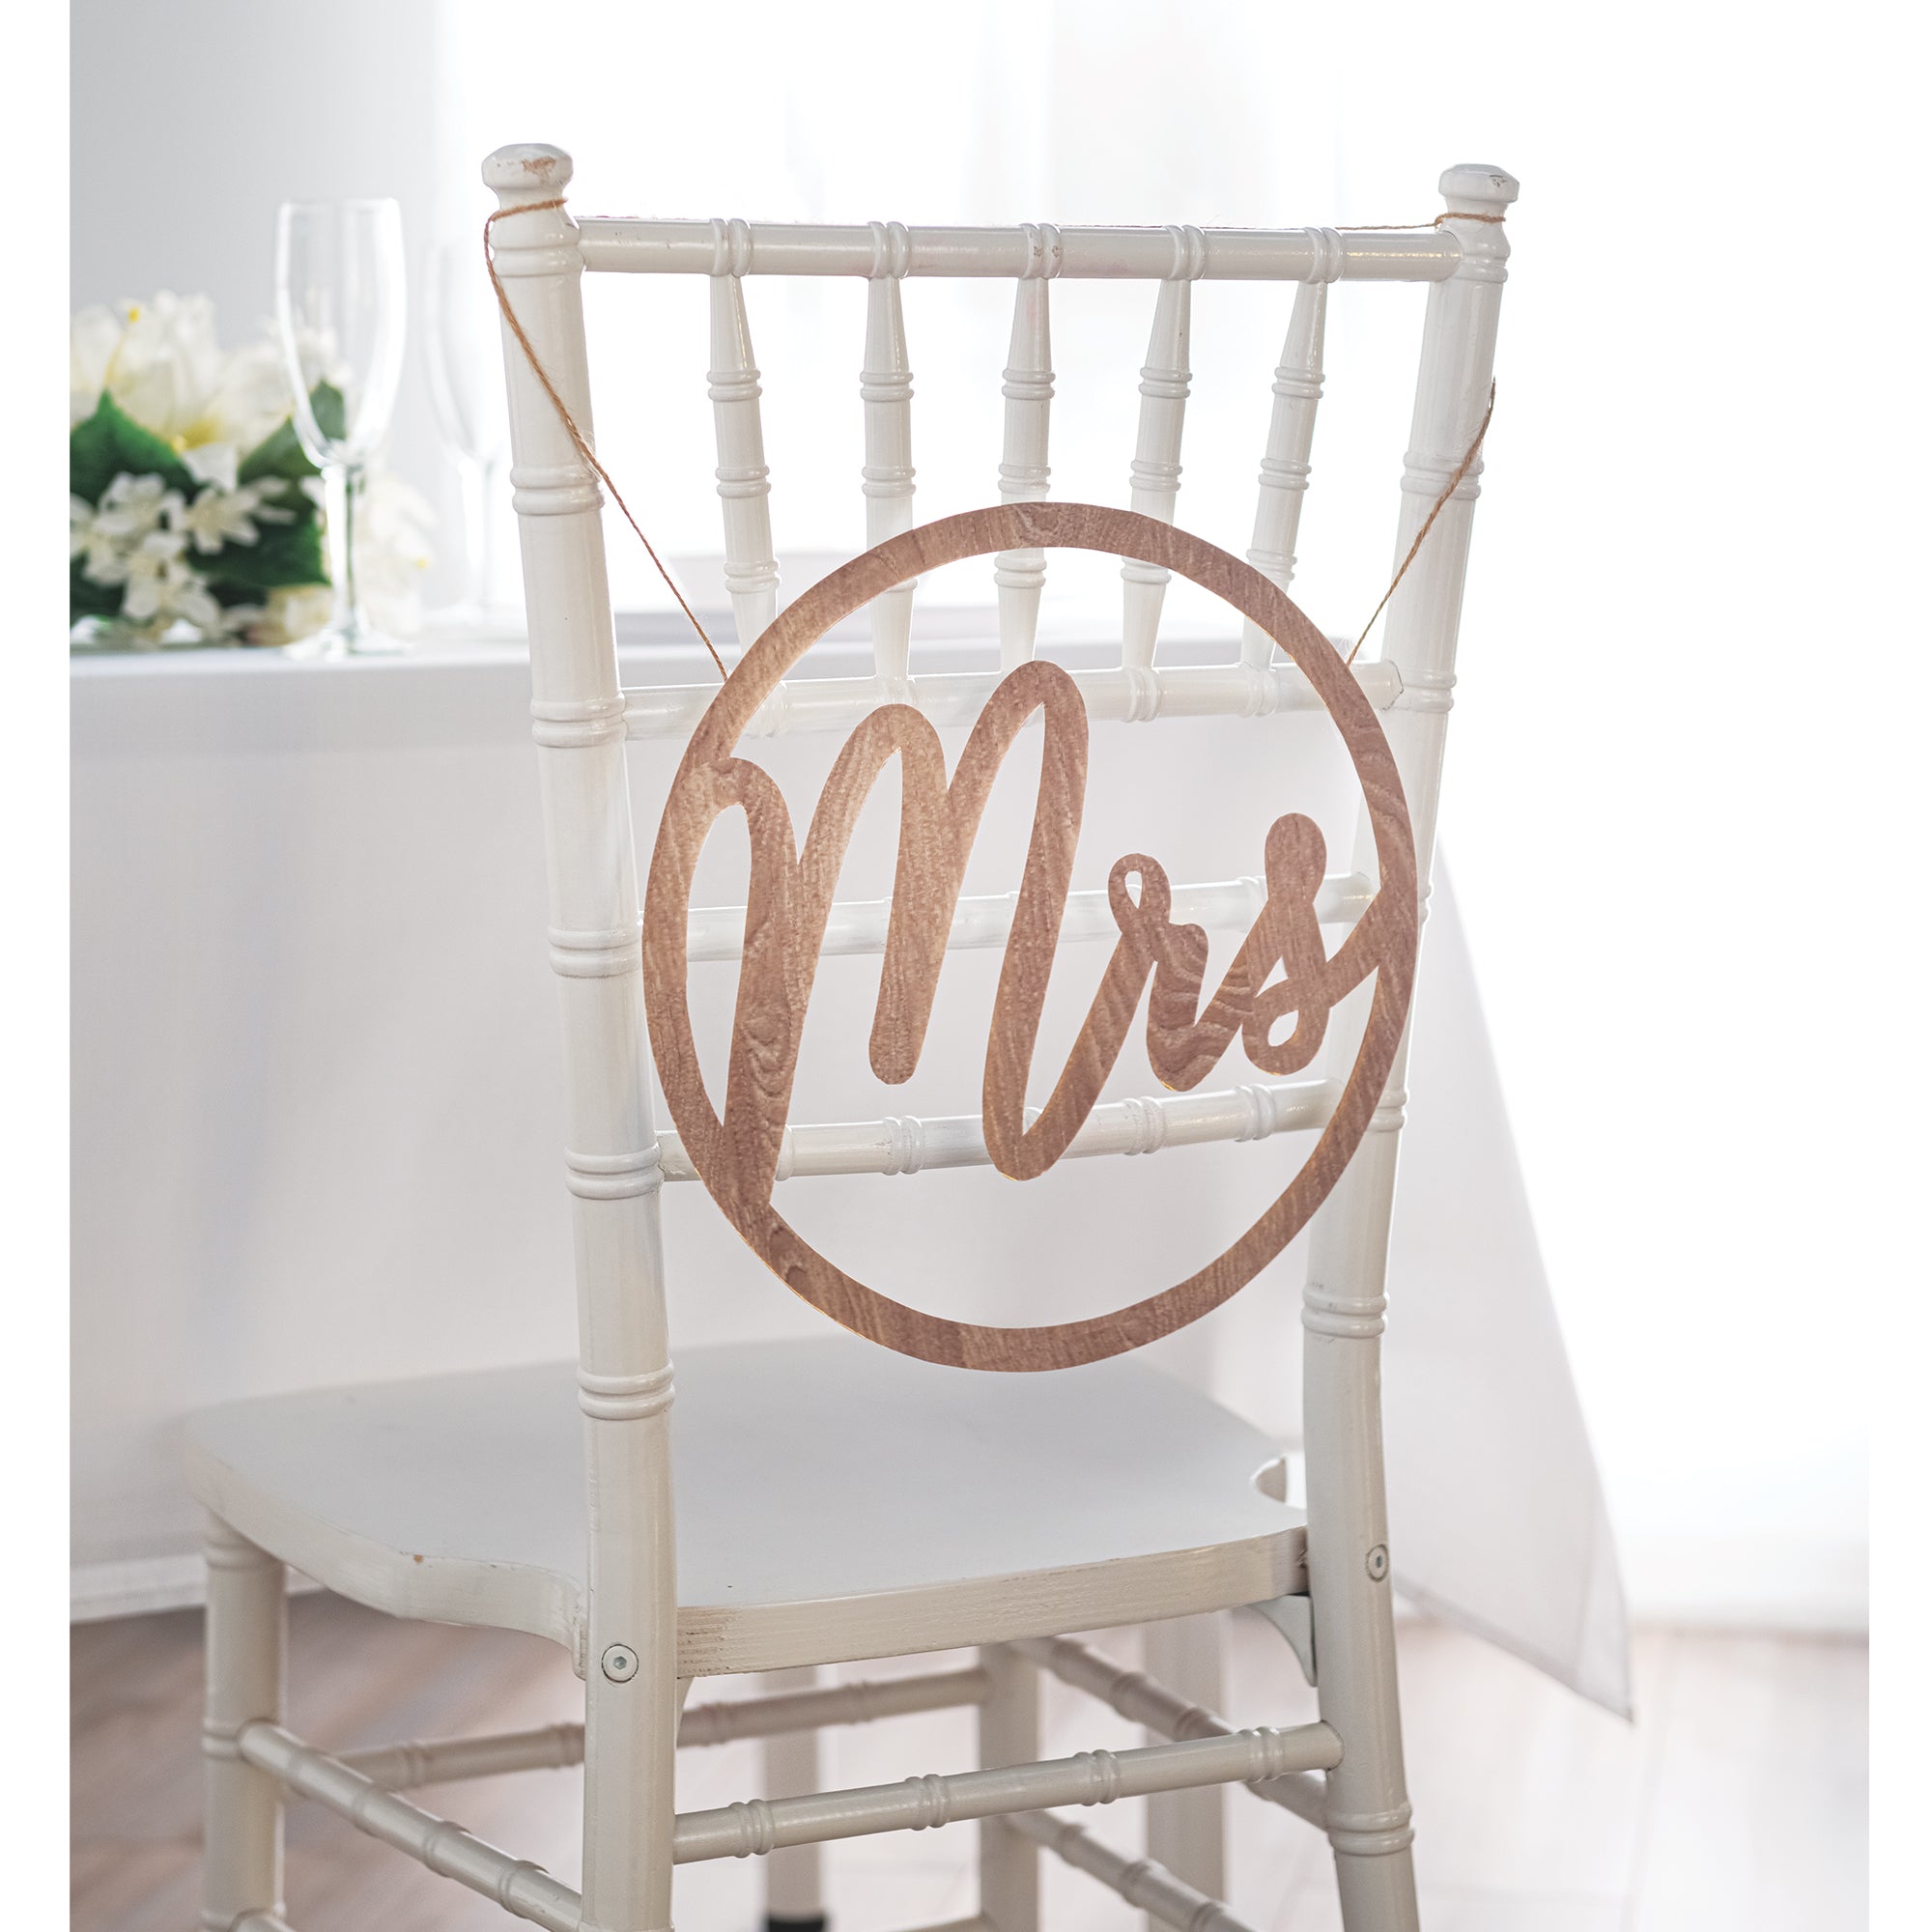 Mrs 11 1/2" Hanging Chair Sign